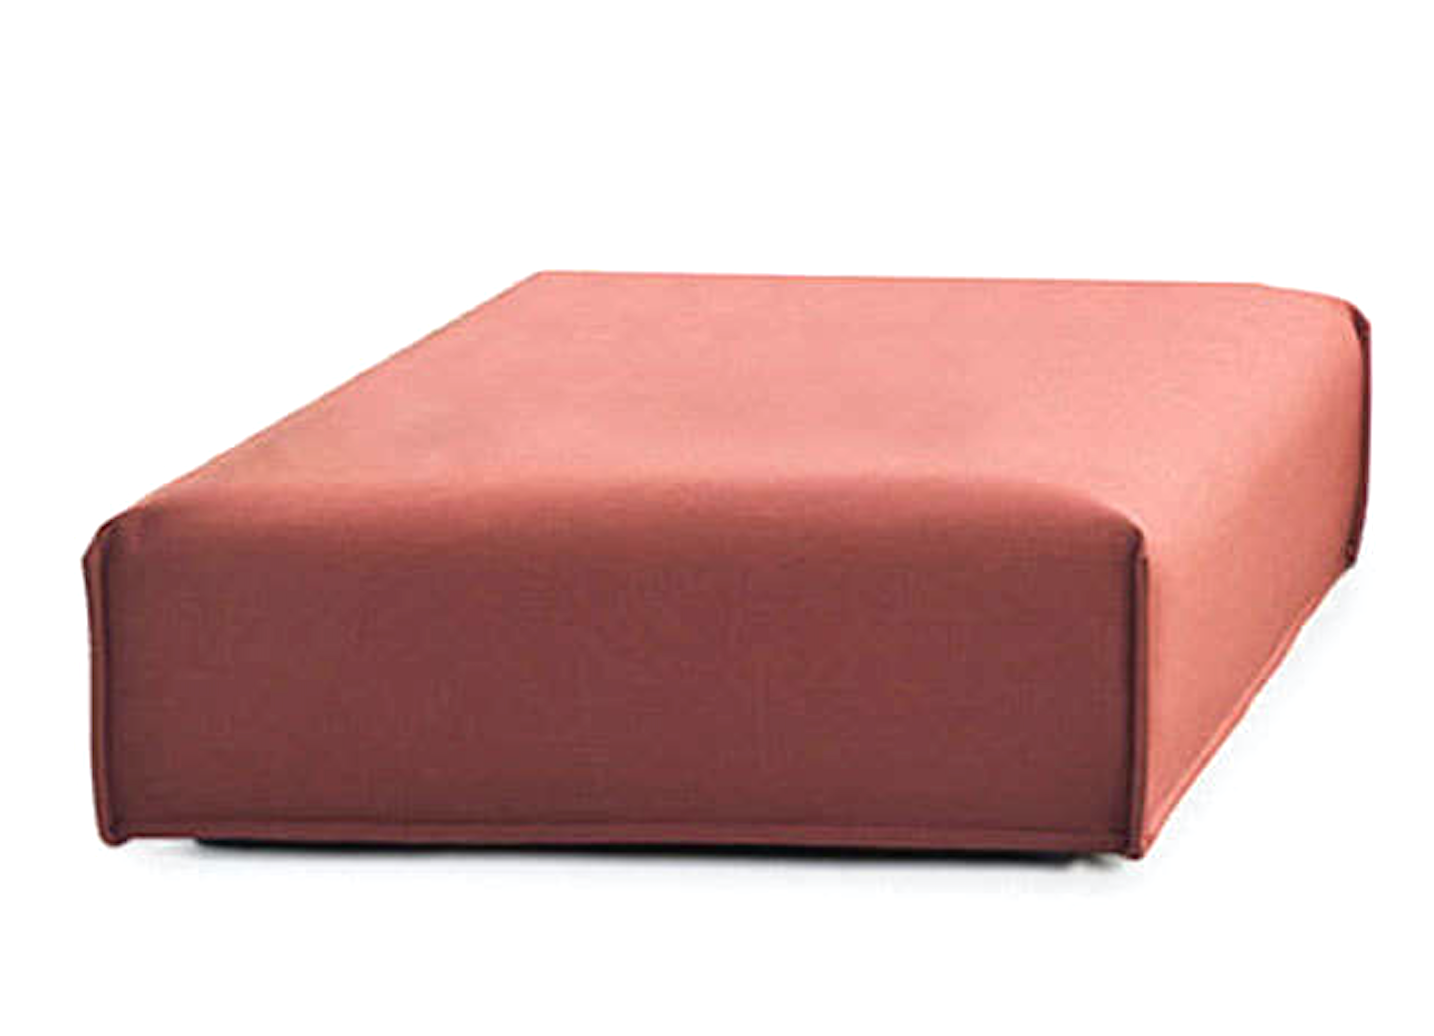 Product Image M.a.s.s.a.s. Ottoman